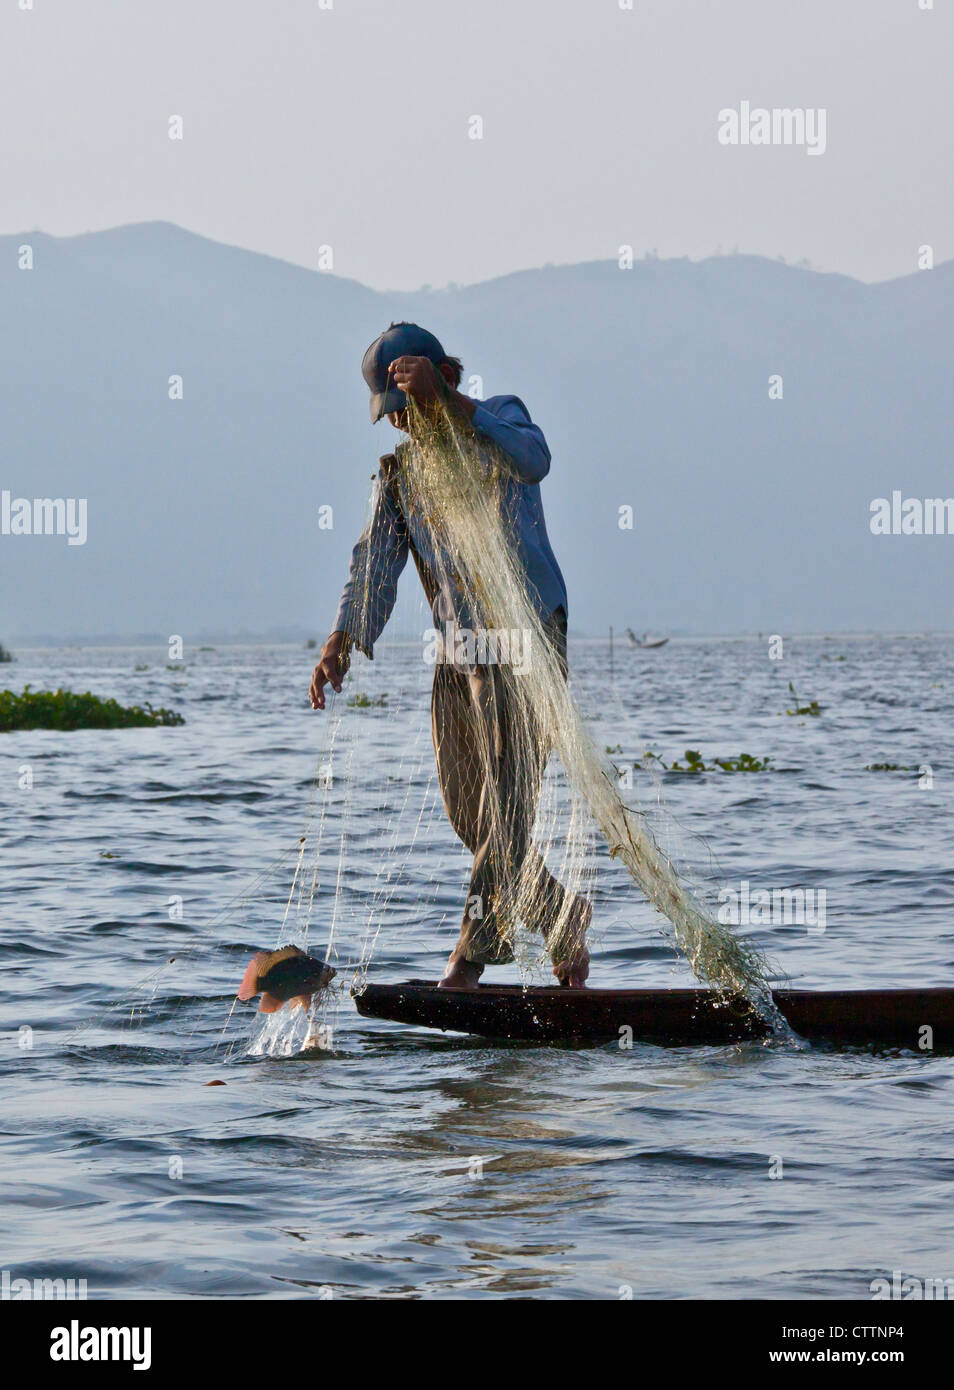 Fishing is still done in the traditonal way with small wooden boats and fishing nets - INLE LAKE, MYANMAR Stock Photo